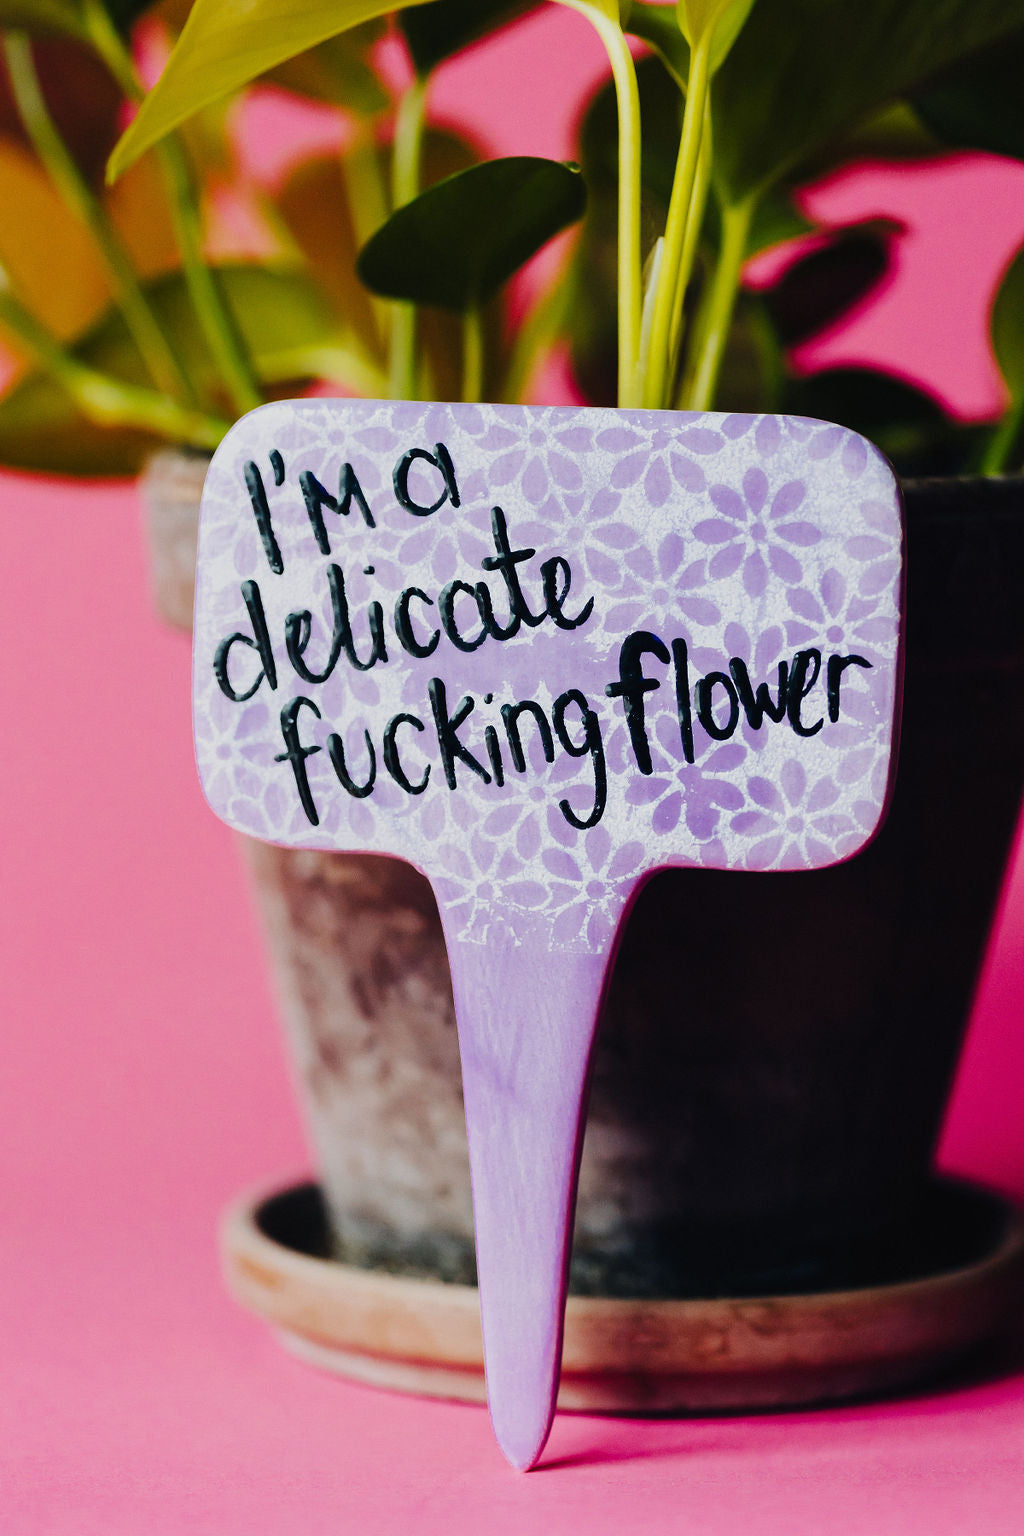 I'm a Delicate F***** Flower Funny Punny Garden Plant Stake